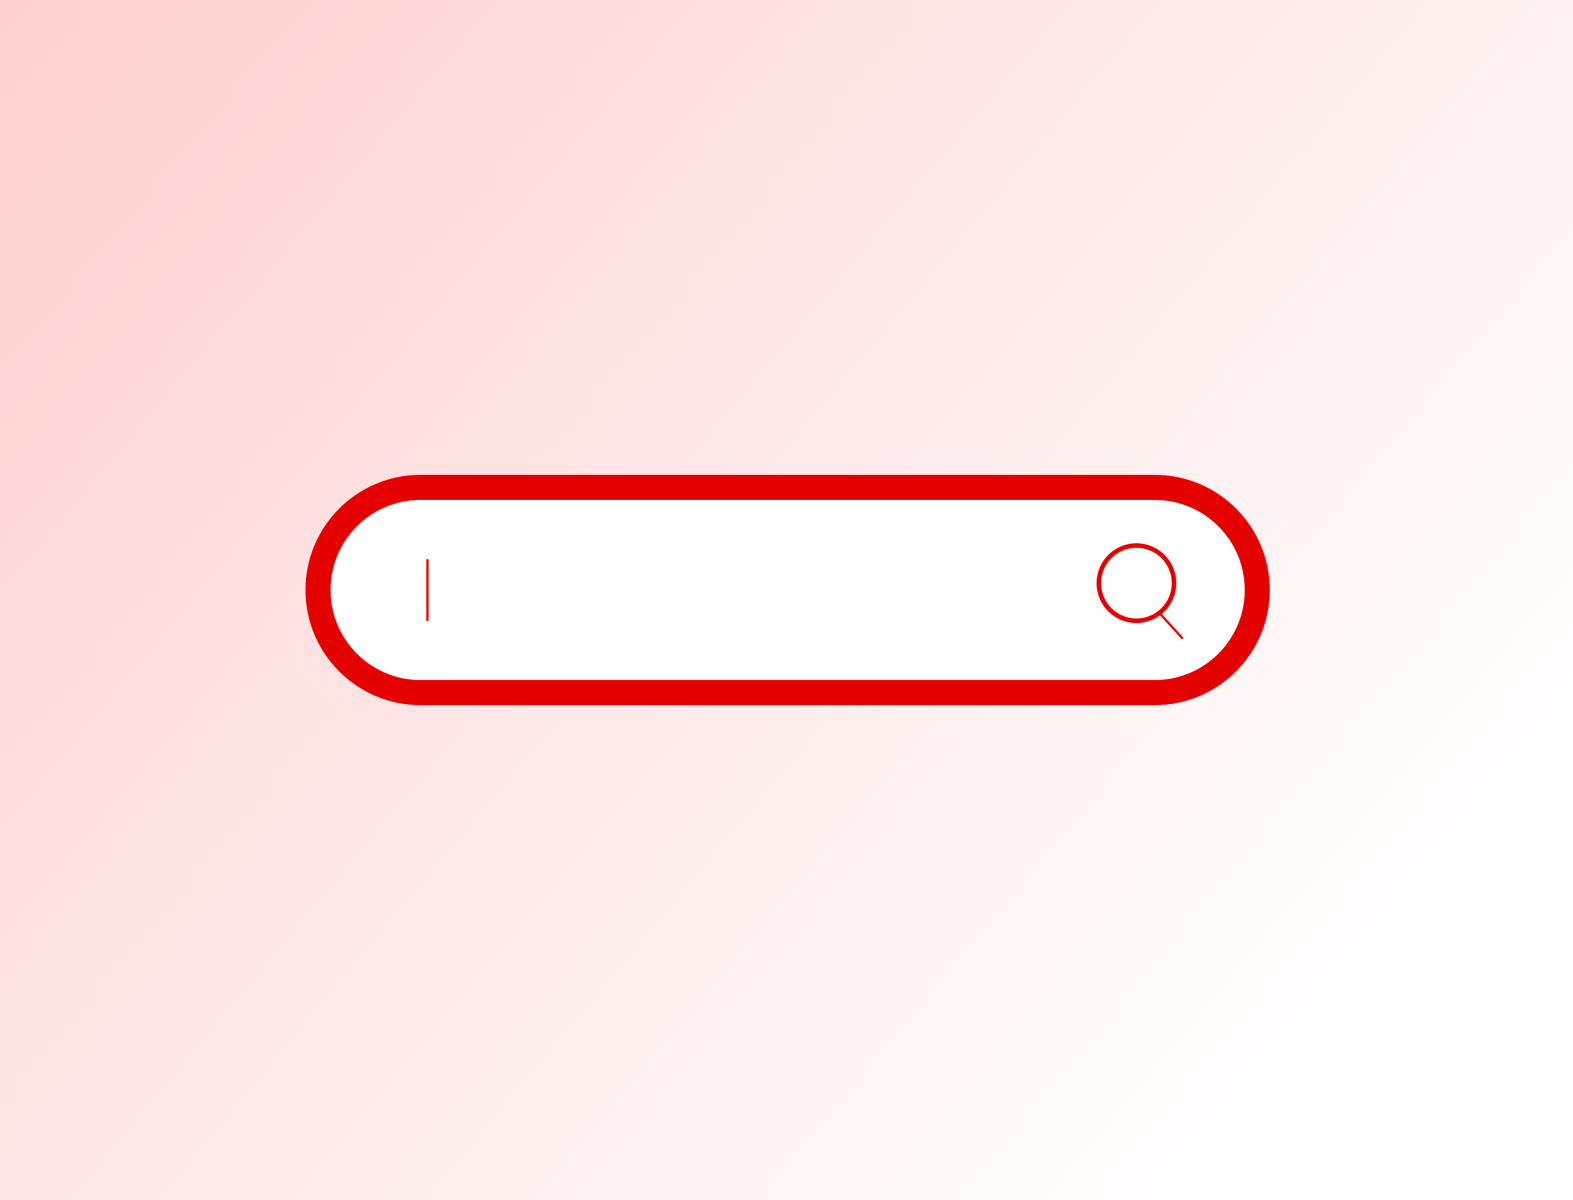 daily iu 22 search bar by annelou jansen on dribbble daily iu 22 search bar by annelou